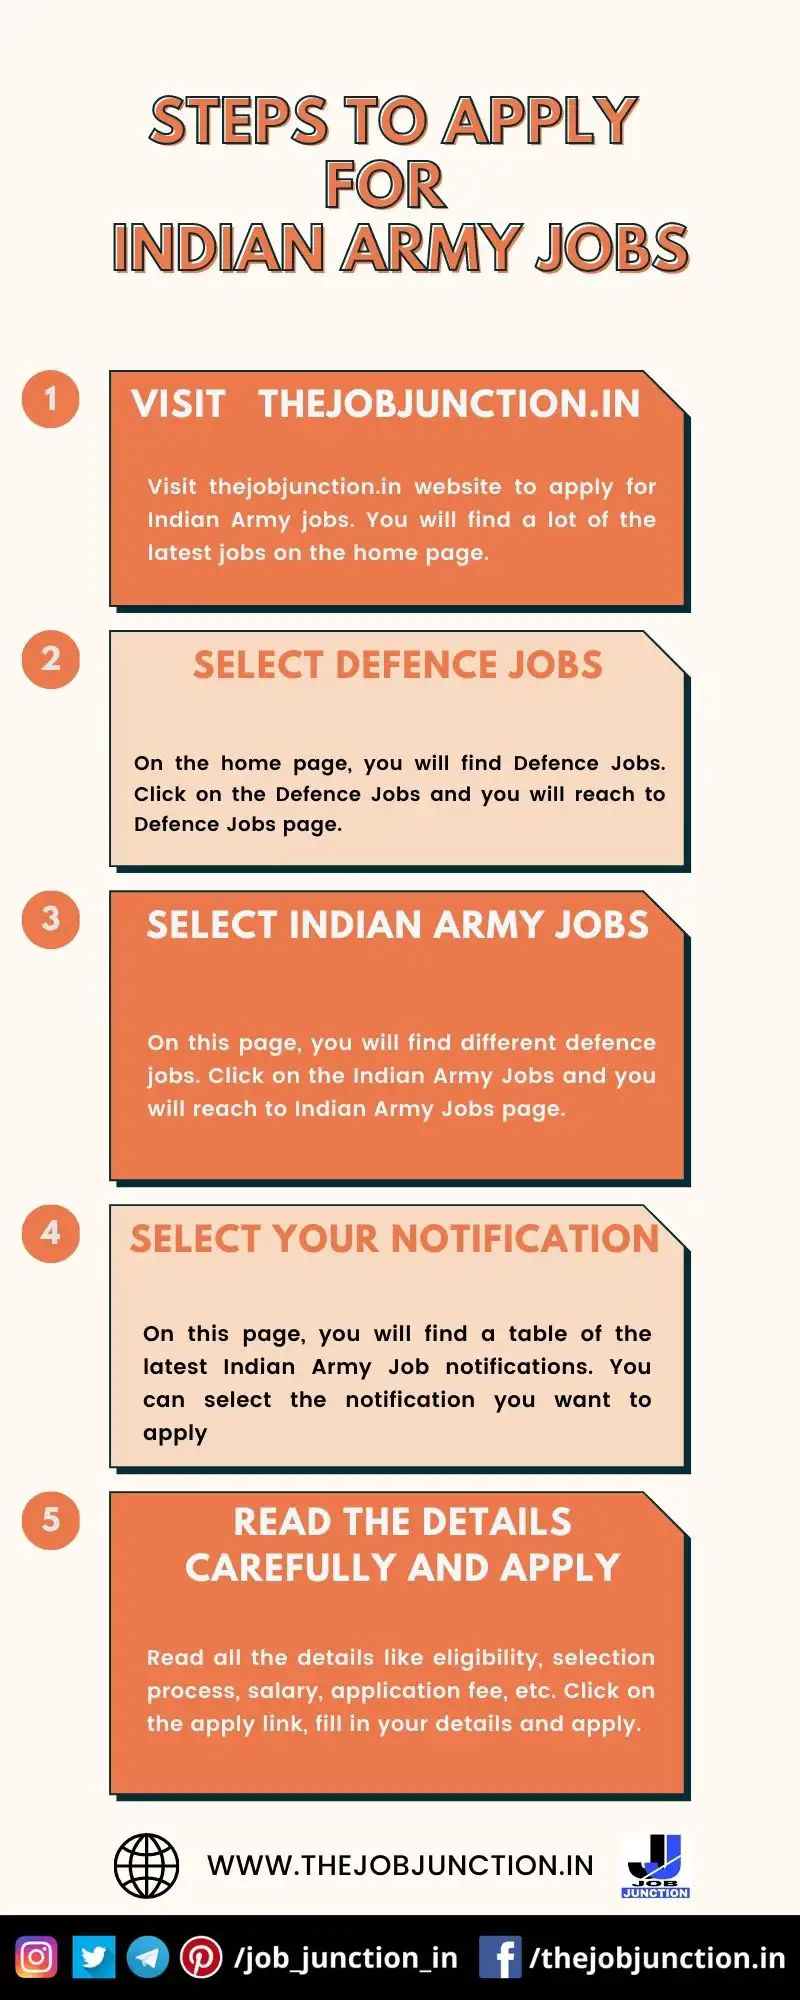 STEPS TO APPLY FOR INDIAN ARMY JOBS